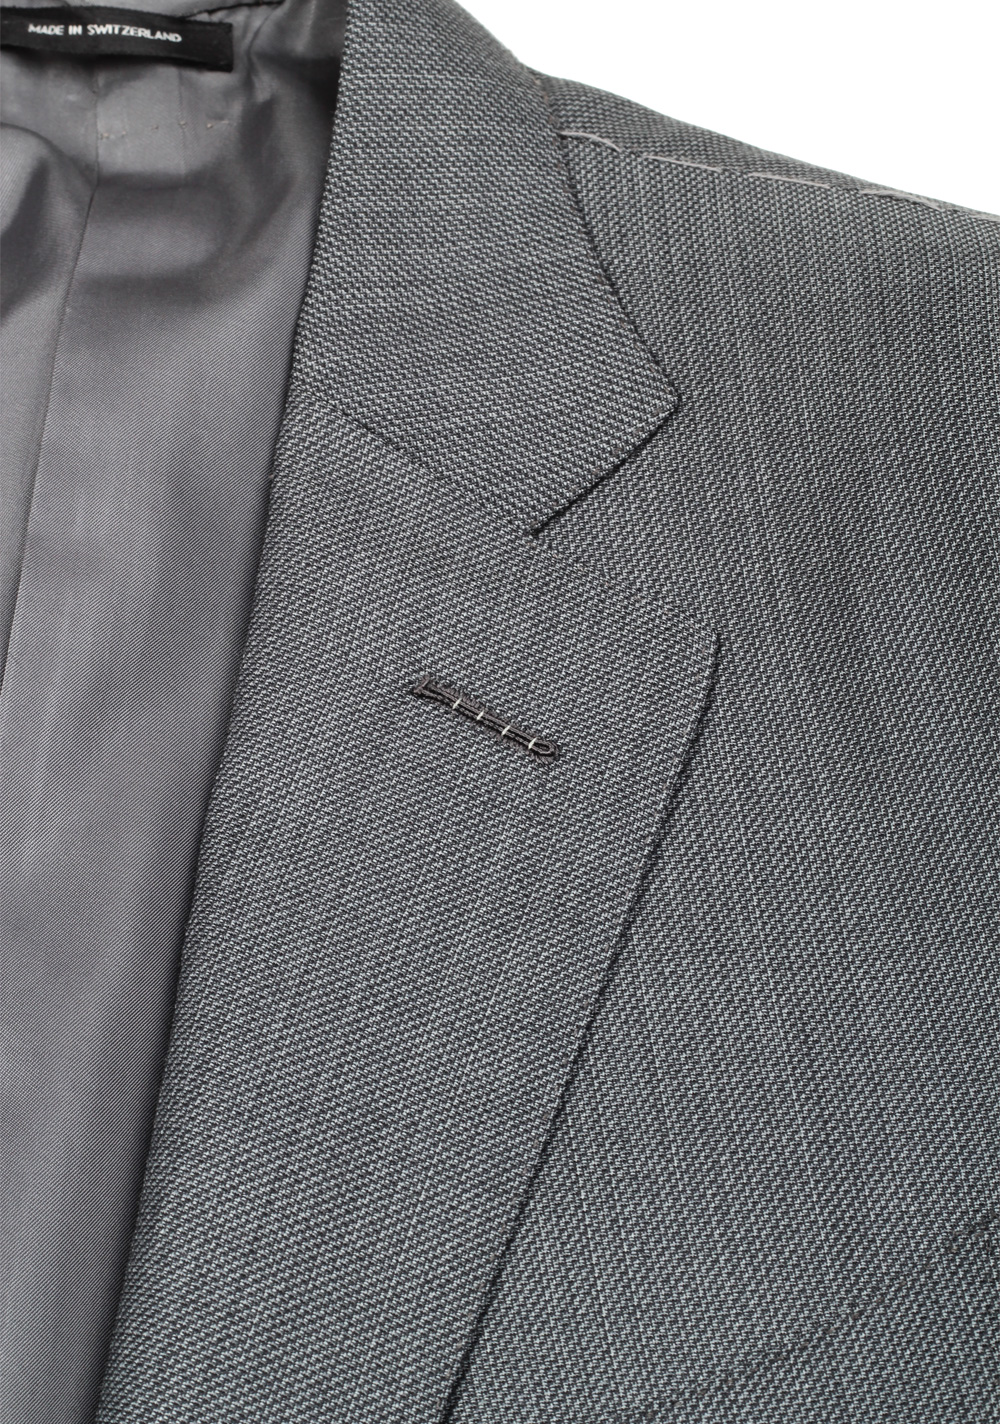 TOM FORD O’Connor Gray Suit Size 50L / 40L U.S. Wool Fit Y | Costume Limité